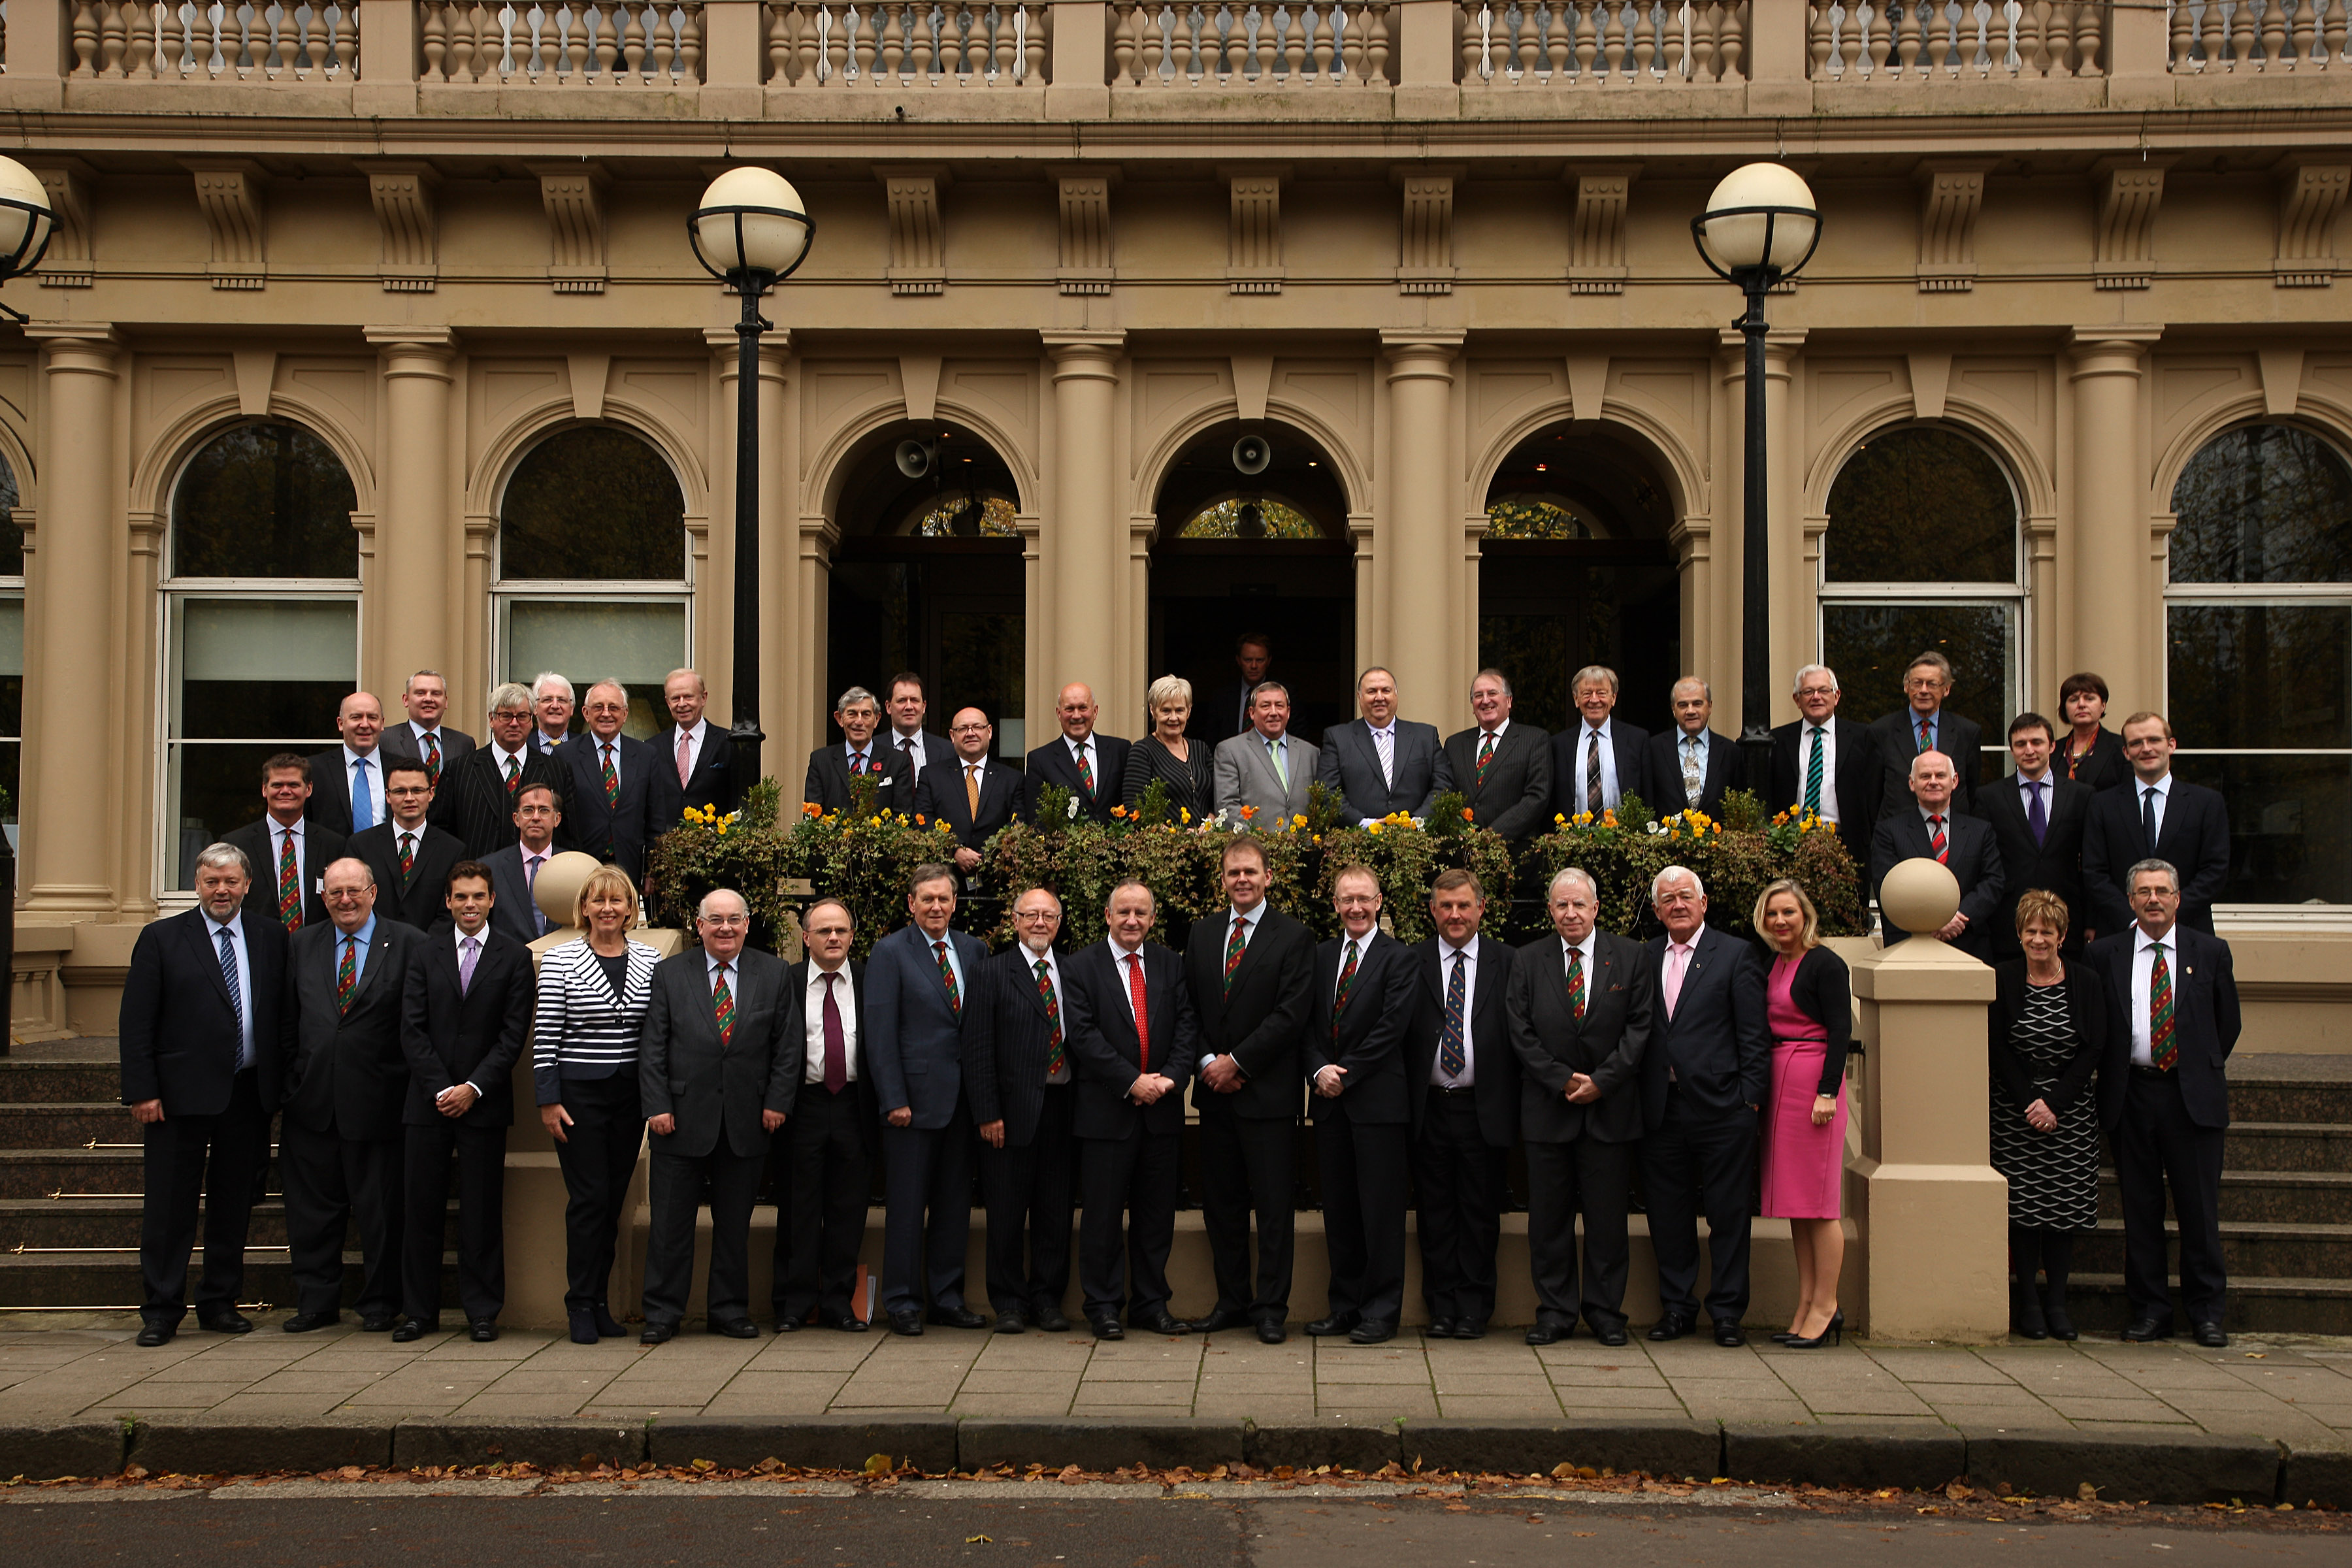 Delegates to the 45th plenary of the British Irish Parliamentary Assembly, Glasgow, 22-23 October 2012